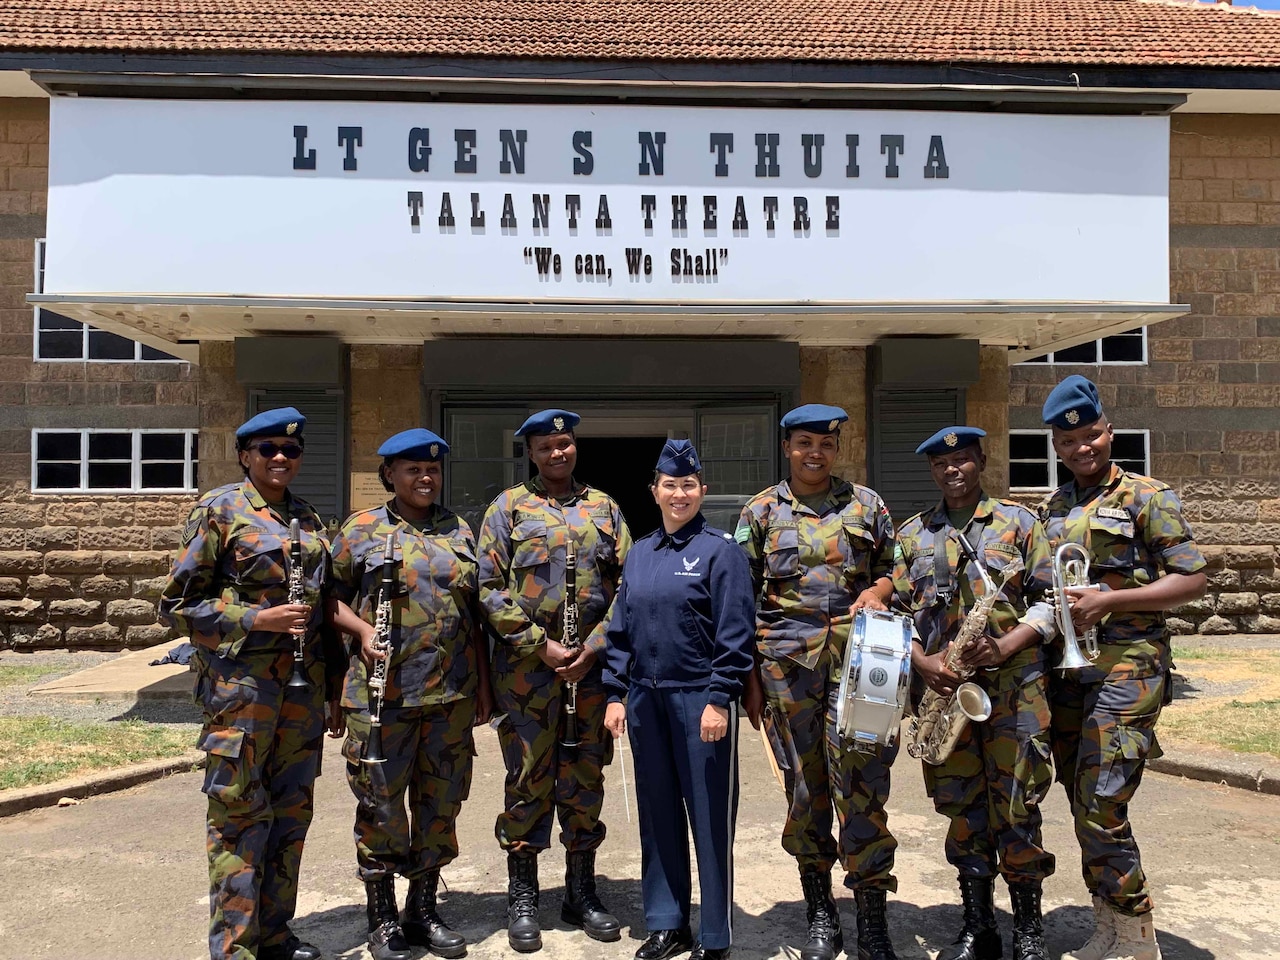 A female U.S. Air Force member poses with six Kenyan Air Force Band members, all of whom are holding instruments, outside a theater.